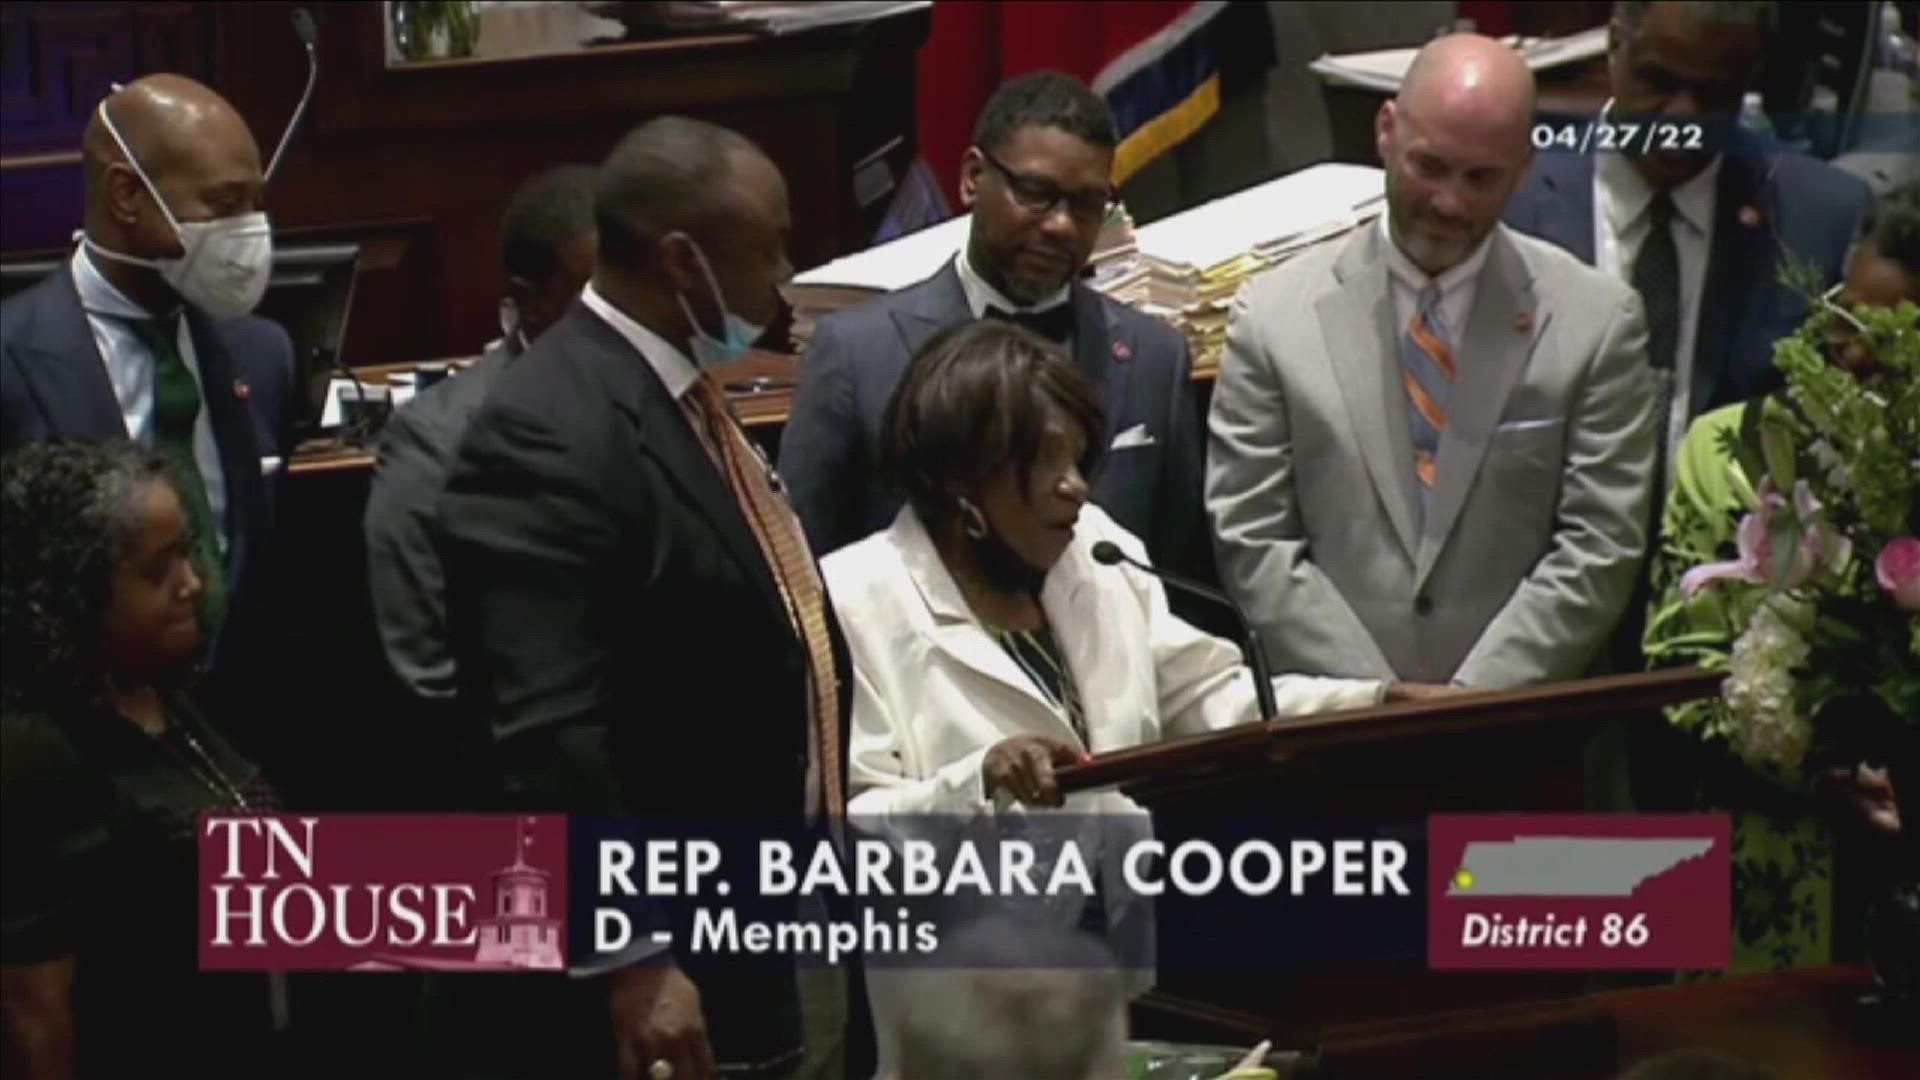 Cooper was a Memphis native and served on the Tennessee State Legislature for more than 25 years.